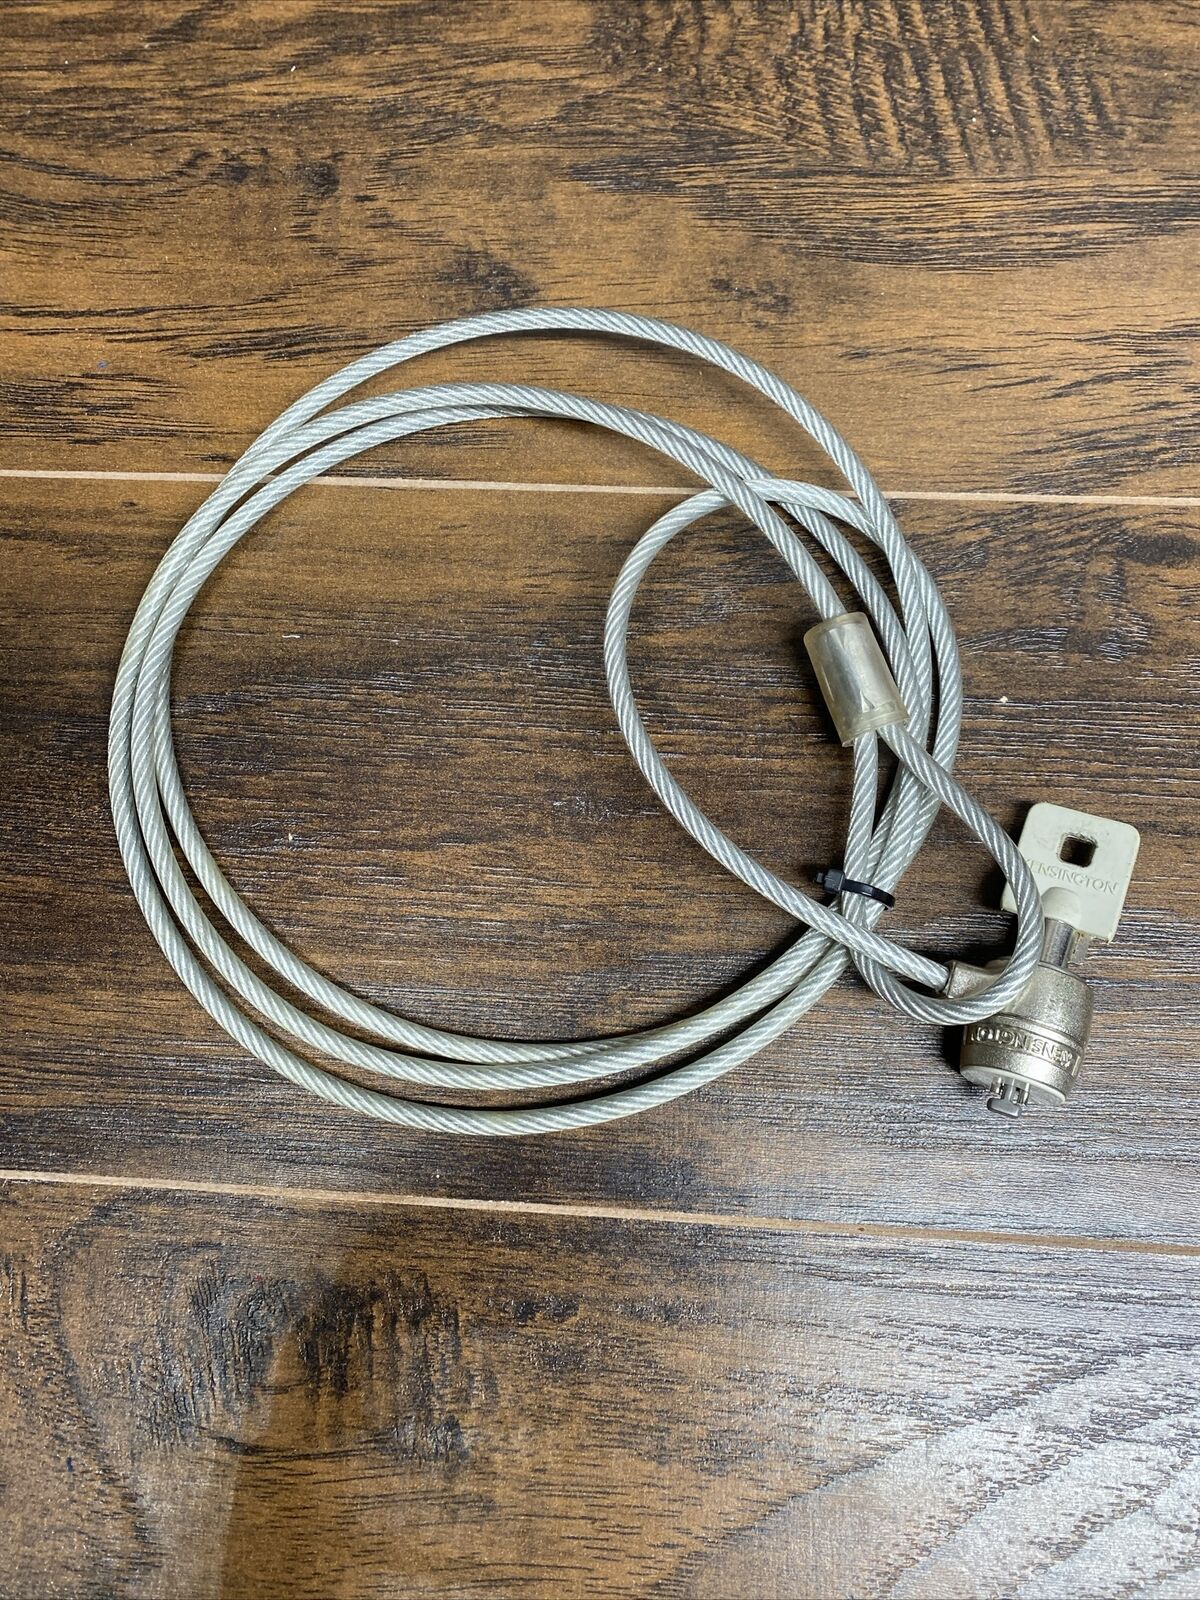 Kensington Laptop Computer Security Lock Cable Chain With Key